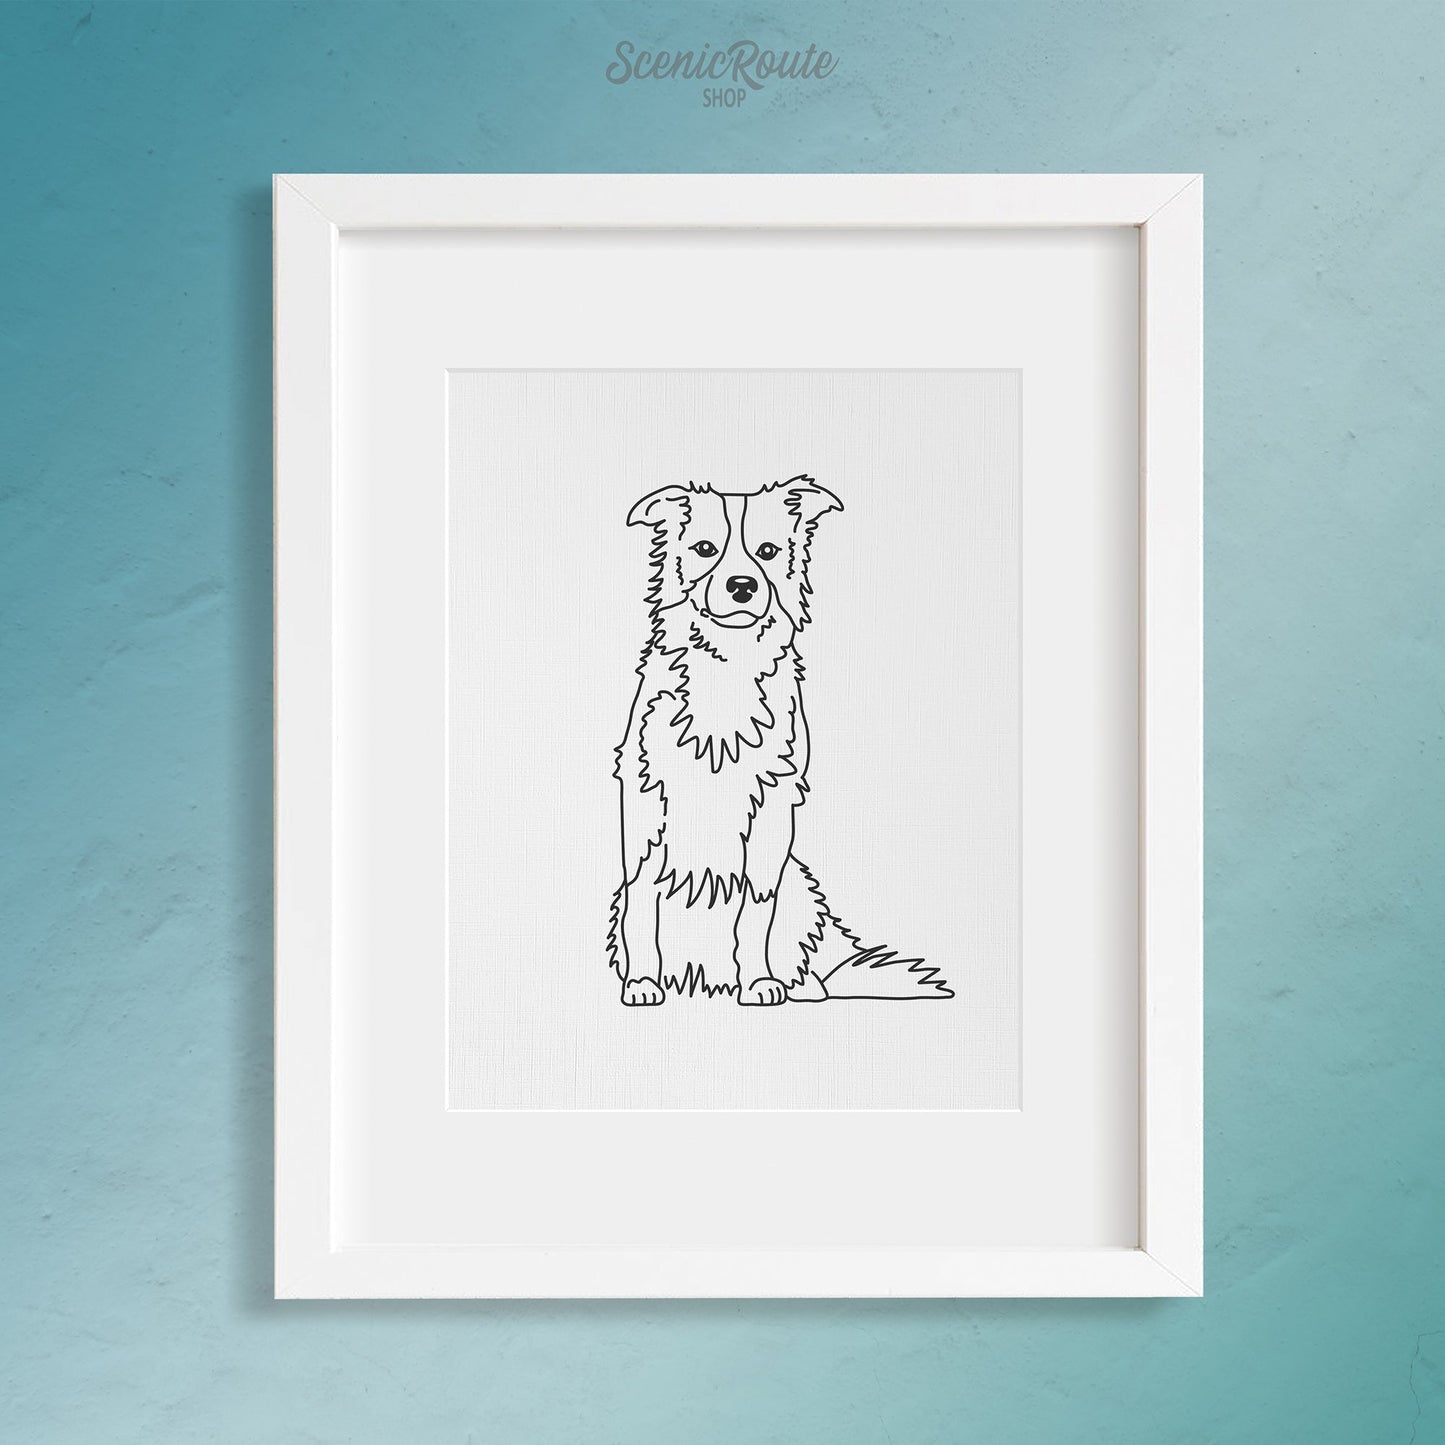 A framed line art drawing of a Border Collie dog on a blue wall